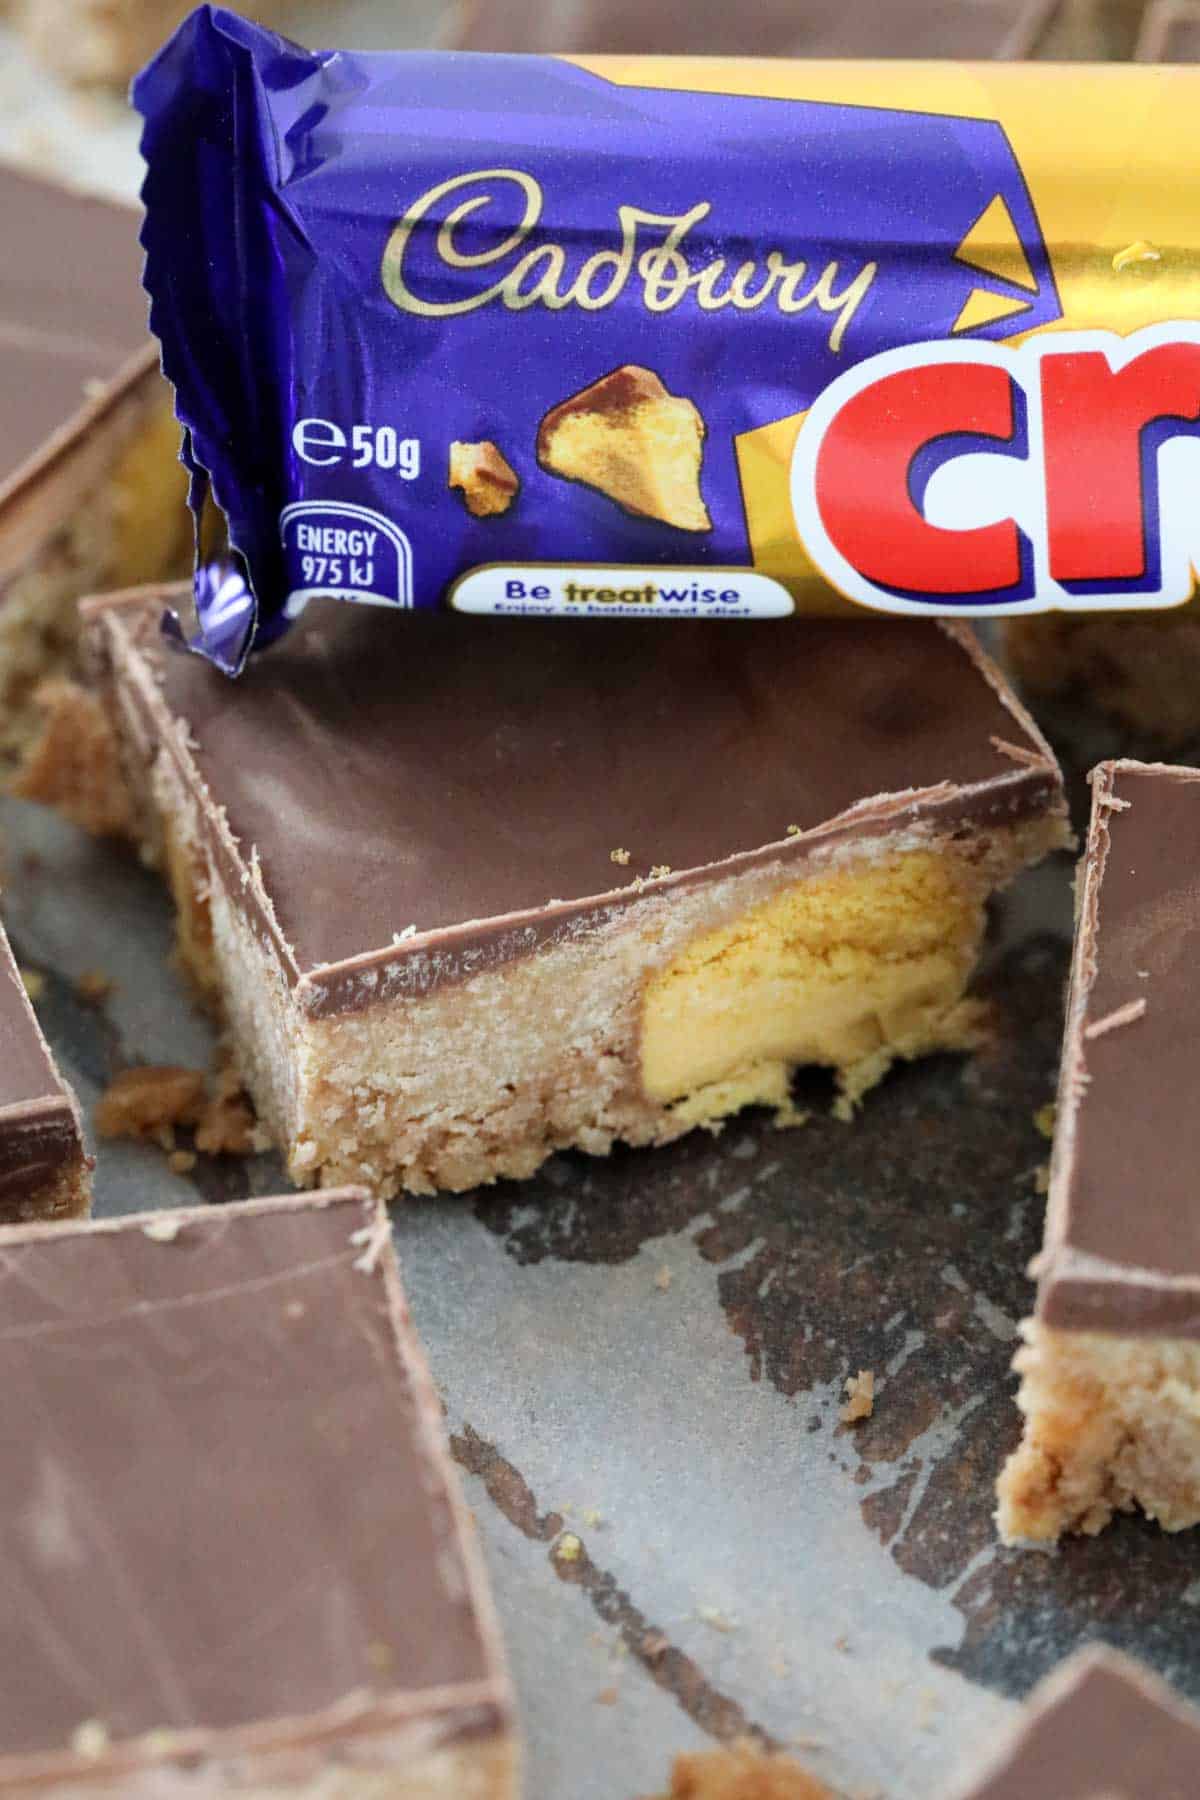 A Crunchie bar on top of squares of a chocolate slice.